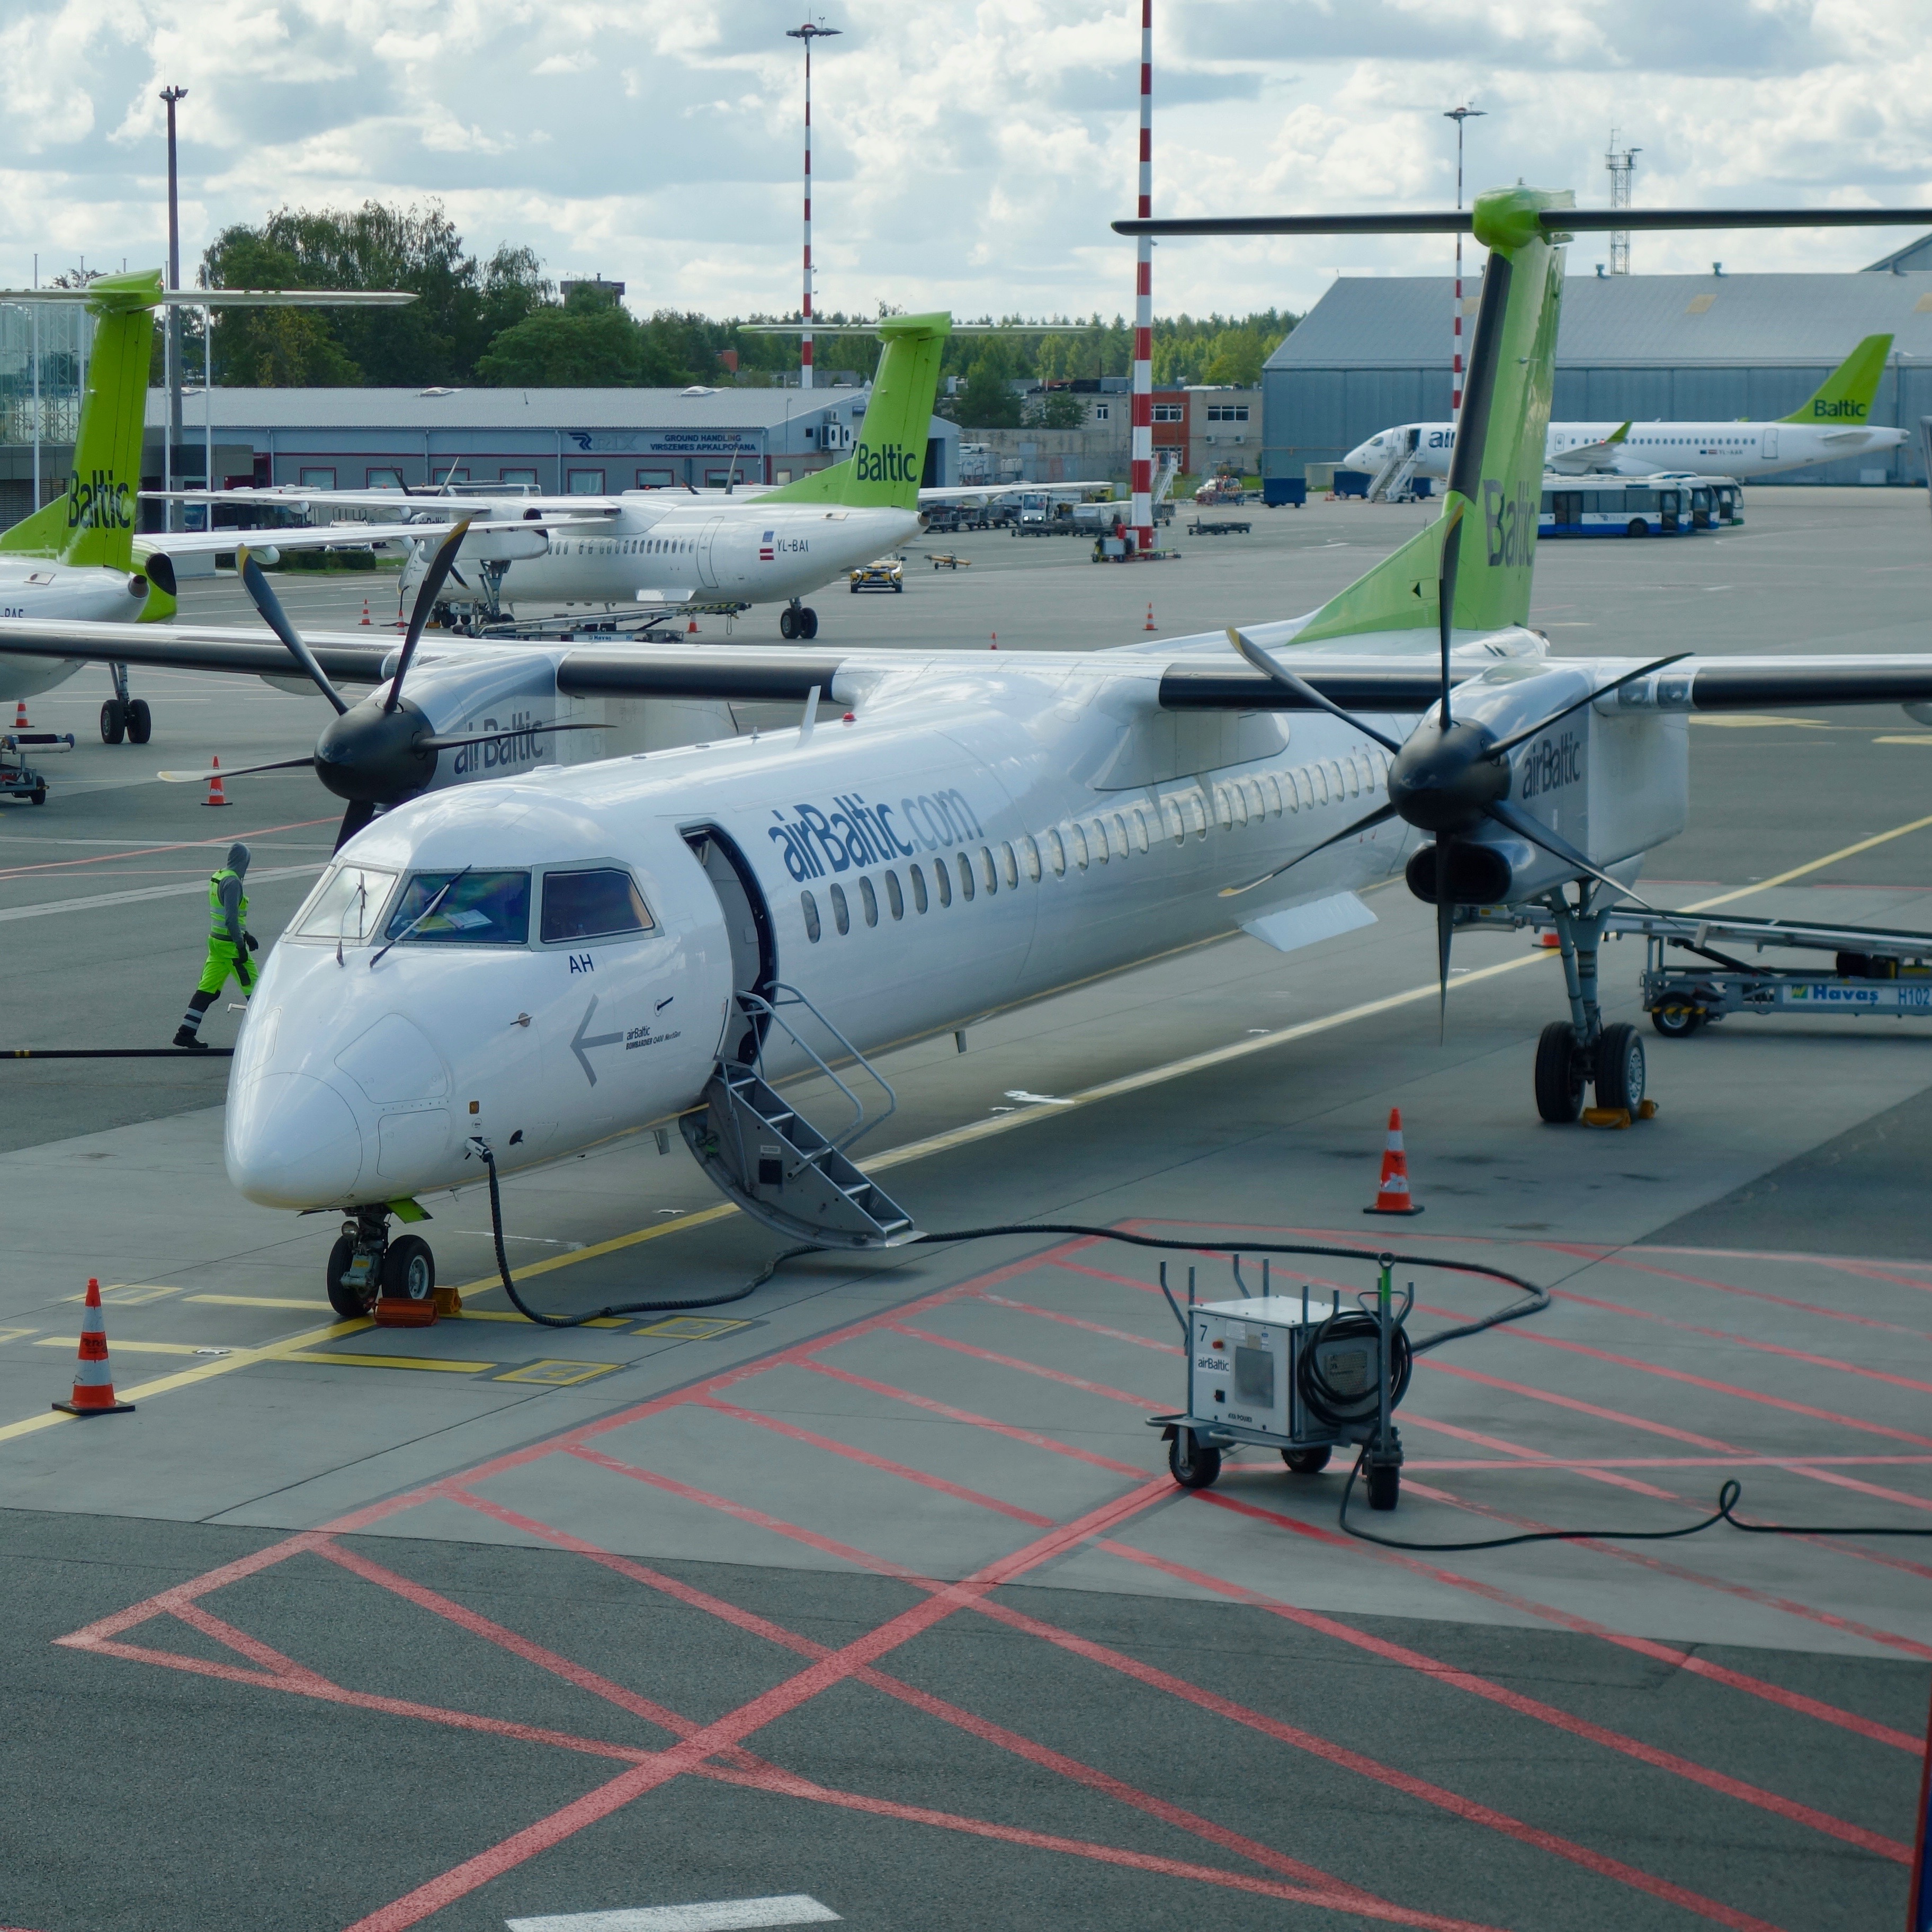 This shot features a Bombardier Q400.  The aircraft has two prominent black propeller turbines supporting the narrow fuselage tube while the green colored tail rises up in the background.  There are several other Q400s in the background. 